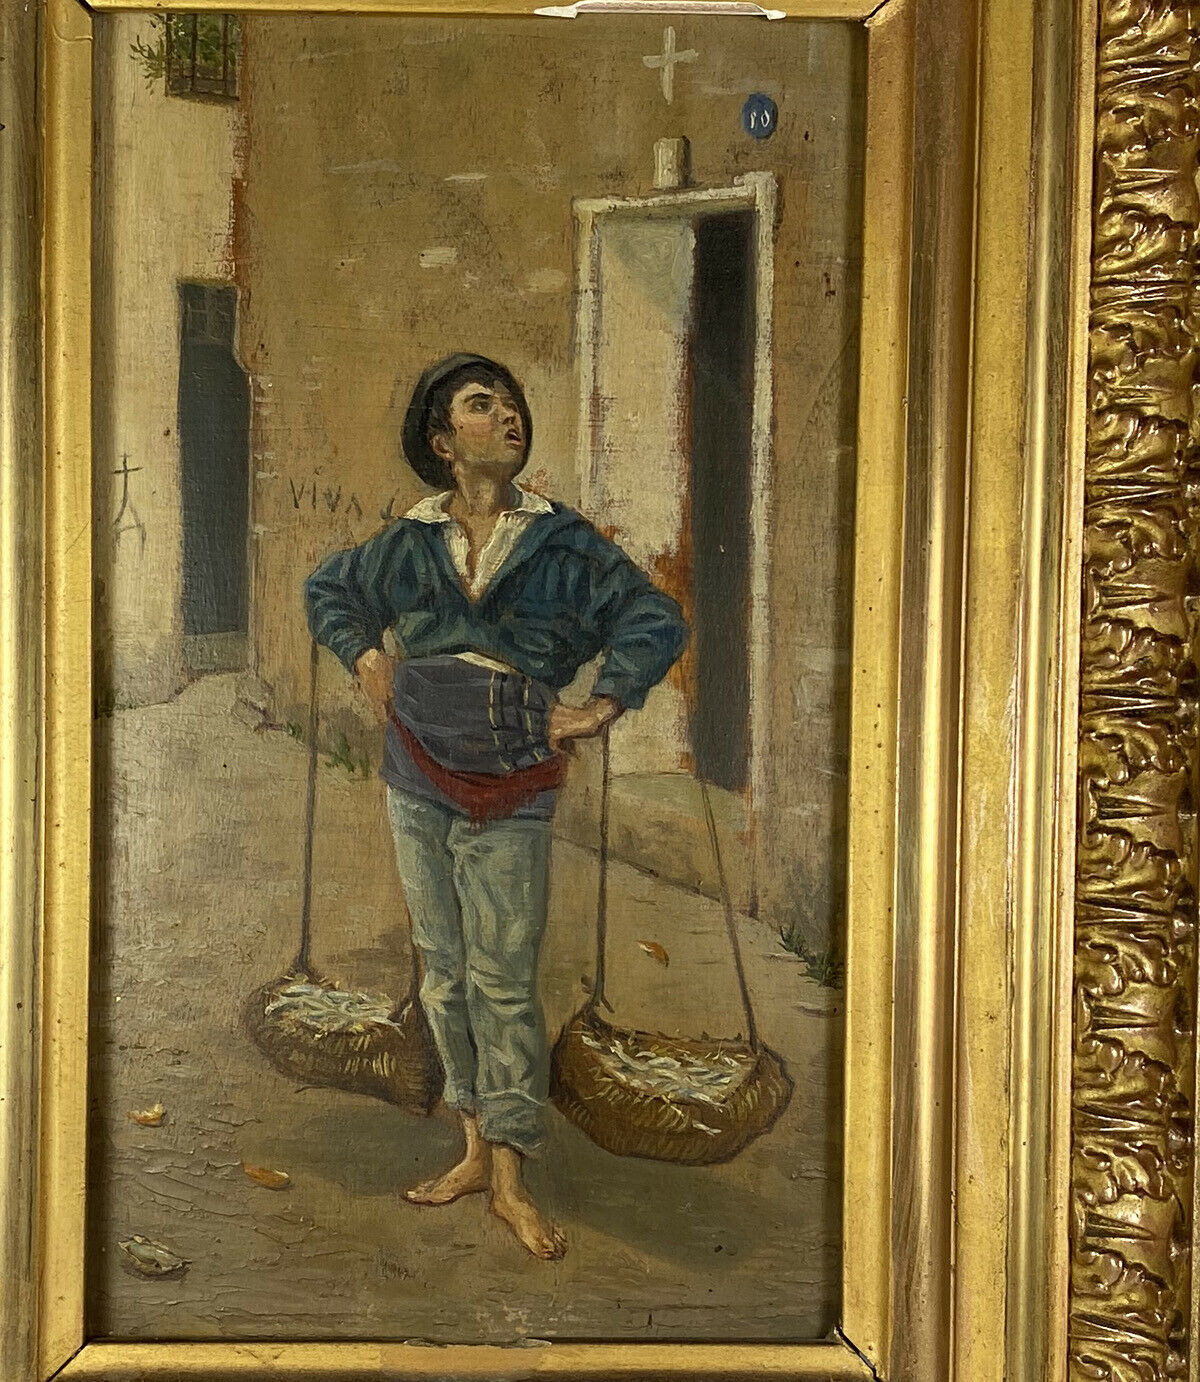 Antique Wood Frame, Gilt Gesso, French Oil Painting on Board, Fish Boy, Pêcheur